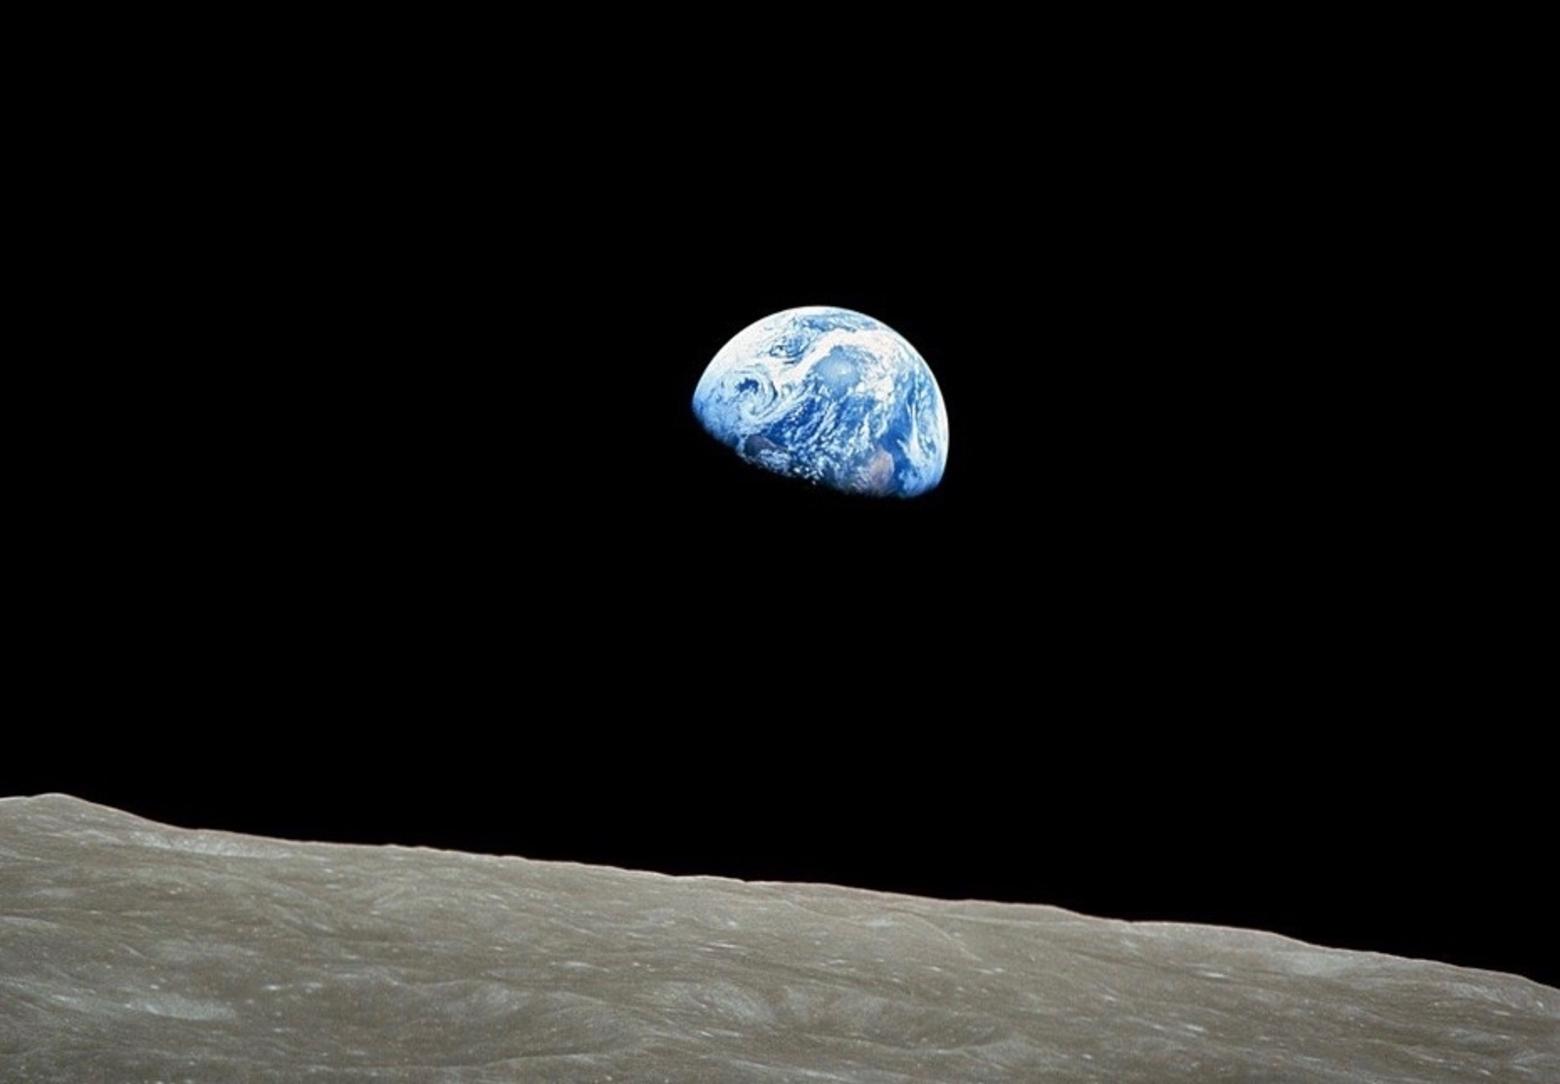 &quot;Earthrise,&quot; a view from Apollo 8 in 1968. Photo courtesy NASA